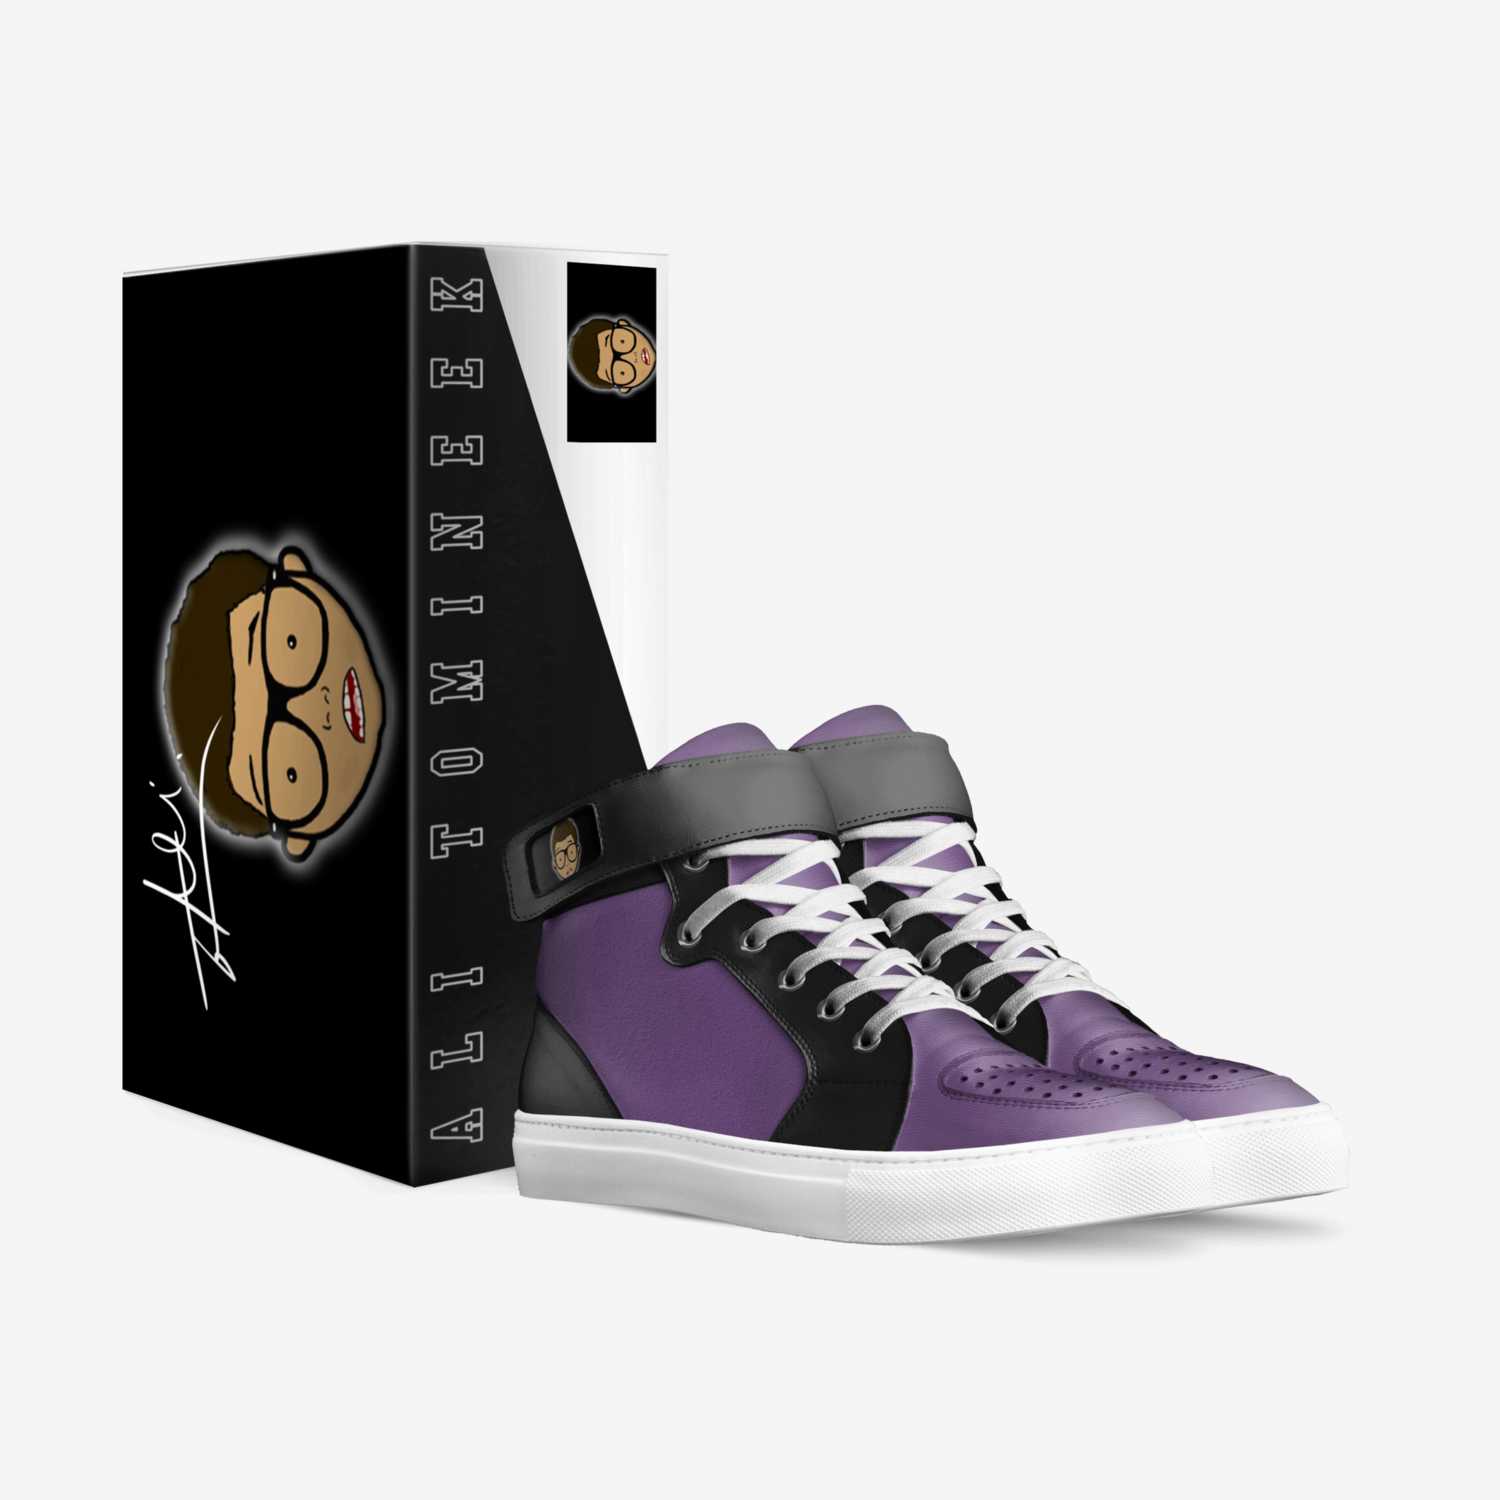 B U   31 custom made in Italy shoes by Dr. Watrugudat | Box view